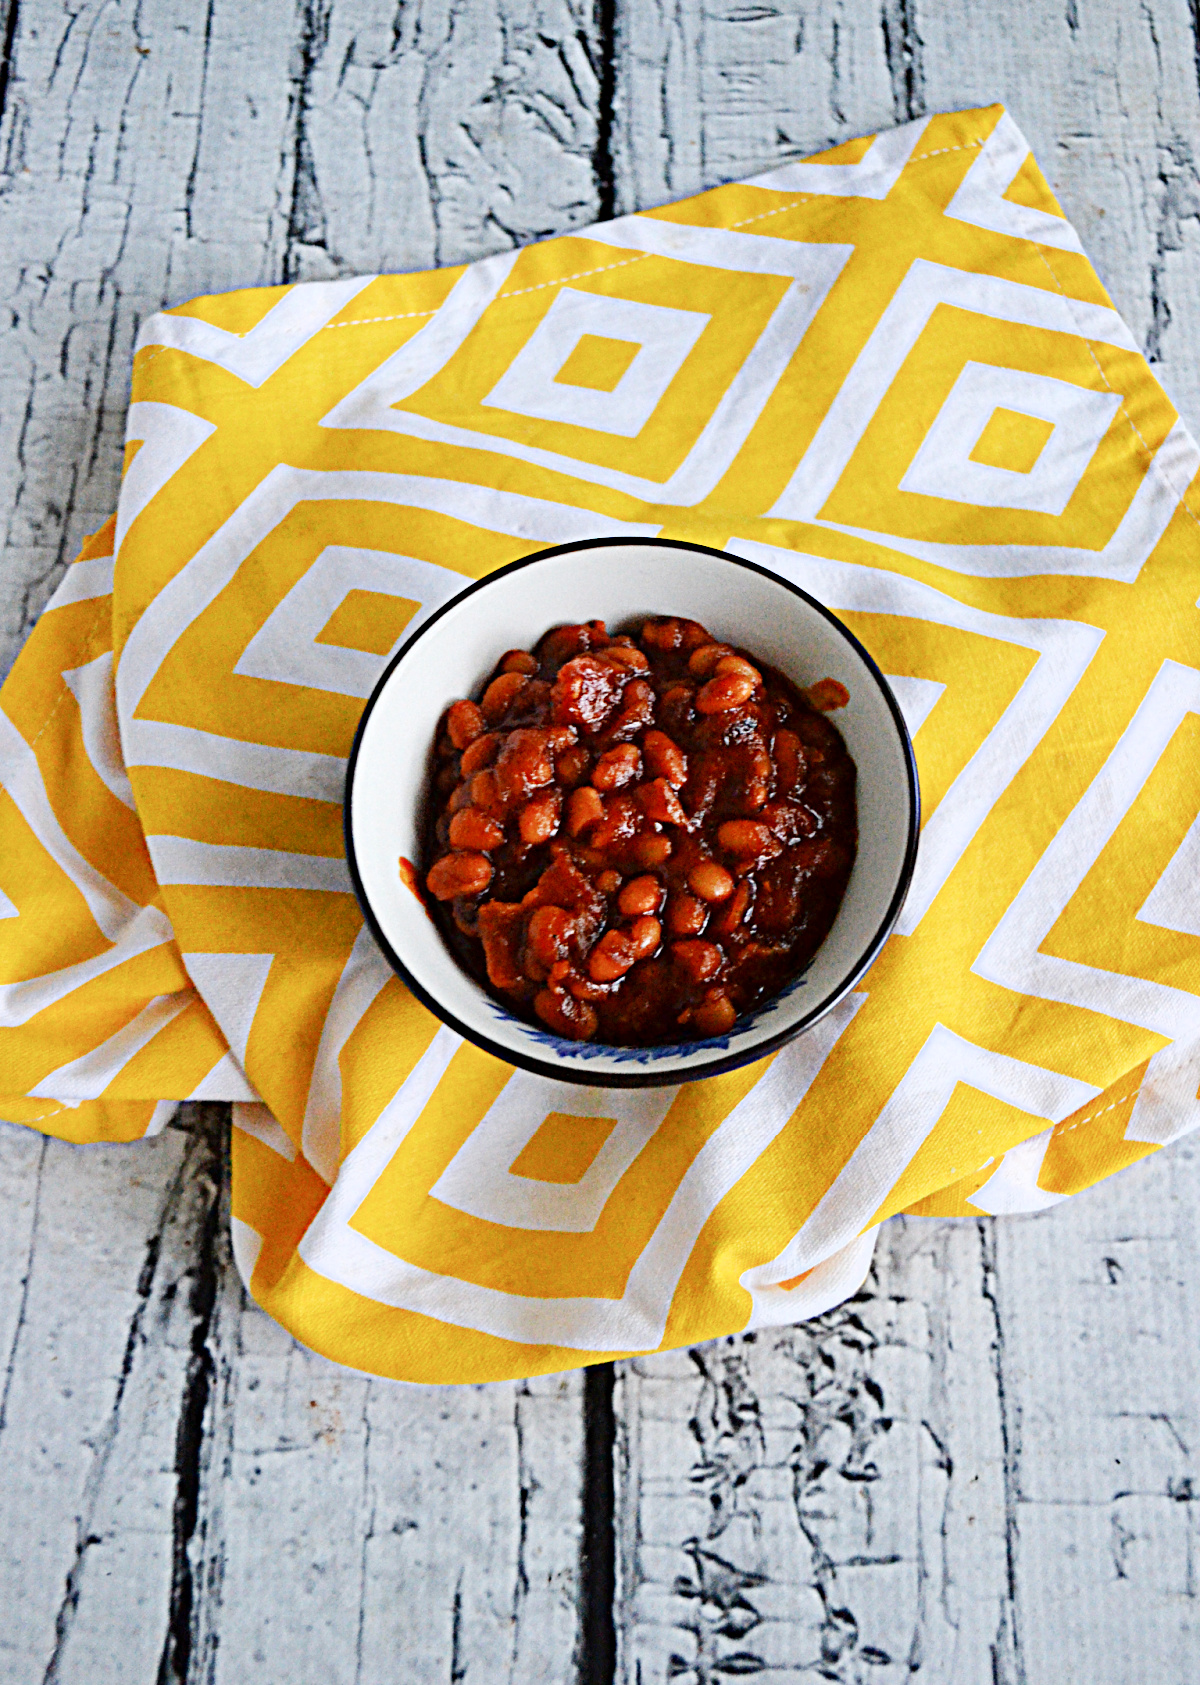 A bowl of baked beans.